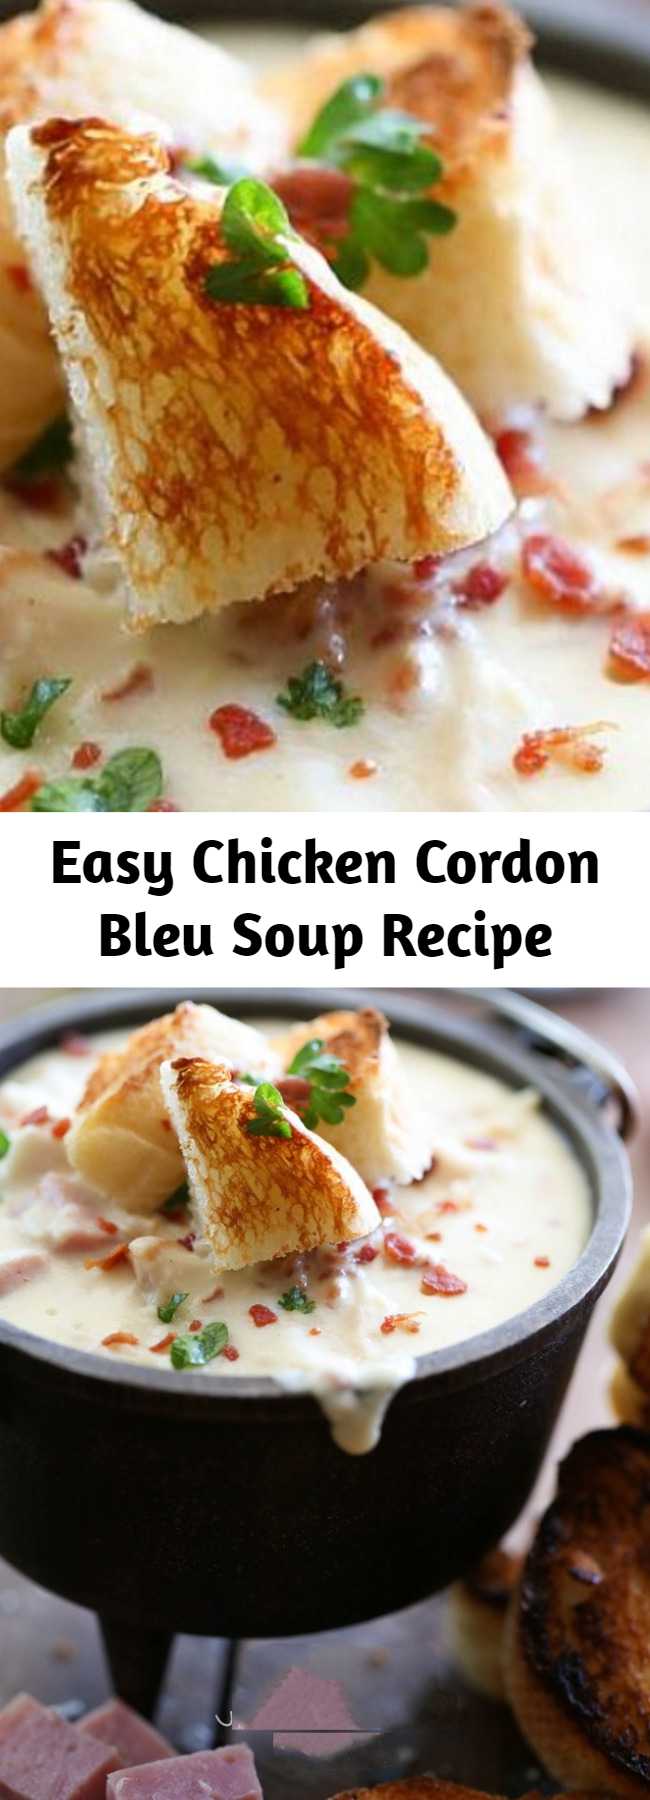 Easy Chicken Cordon Bleu Soup Recipe - Oh. My. Gosh. This is seriously the best soup ever! This recipe is PERFECT for the cooling temperatures and will make the perfect comfort you this fall and winter season! Everyone who tried this gave it rave reviews!